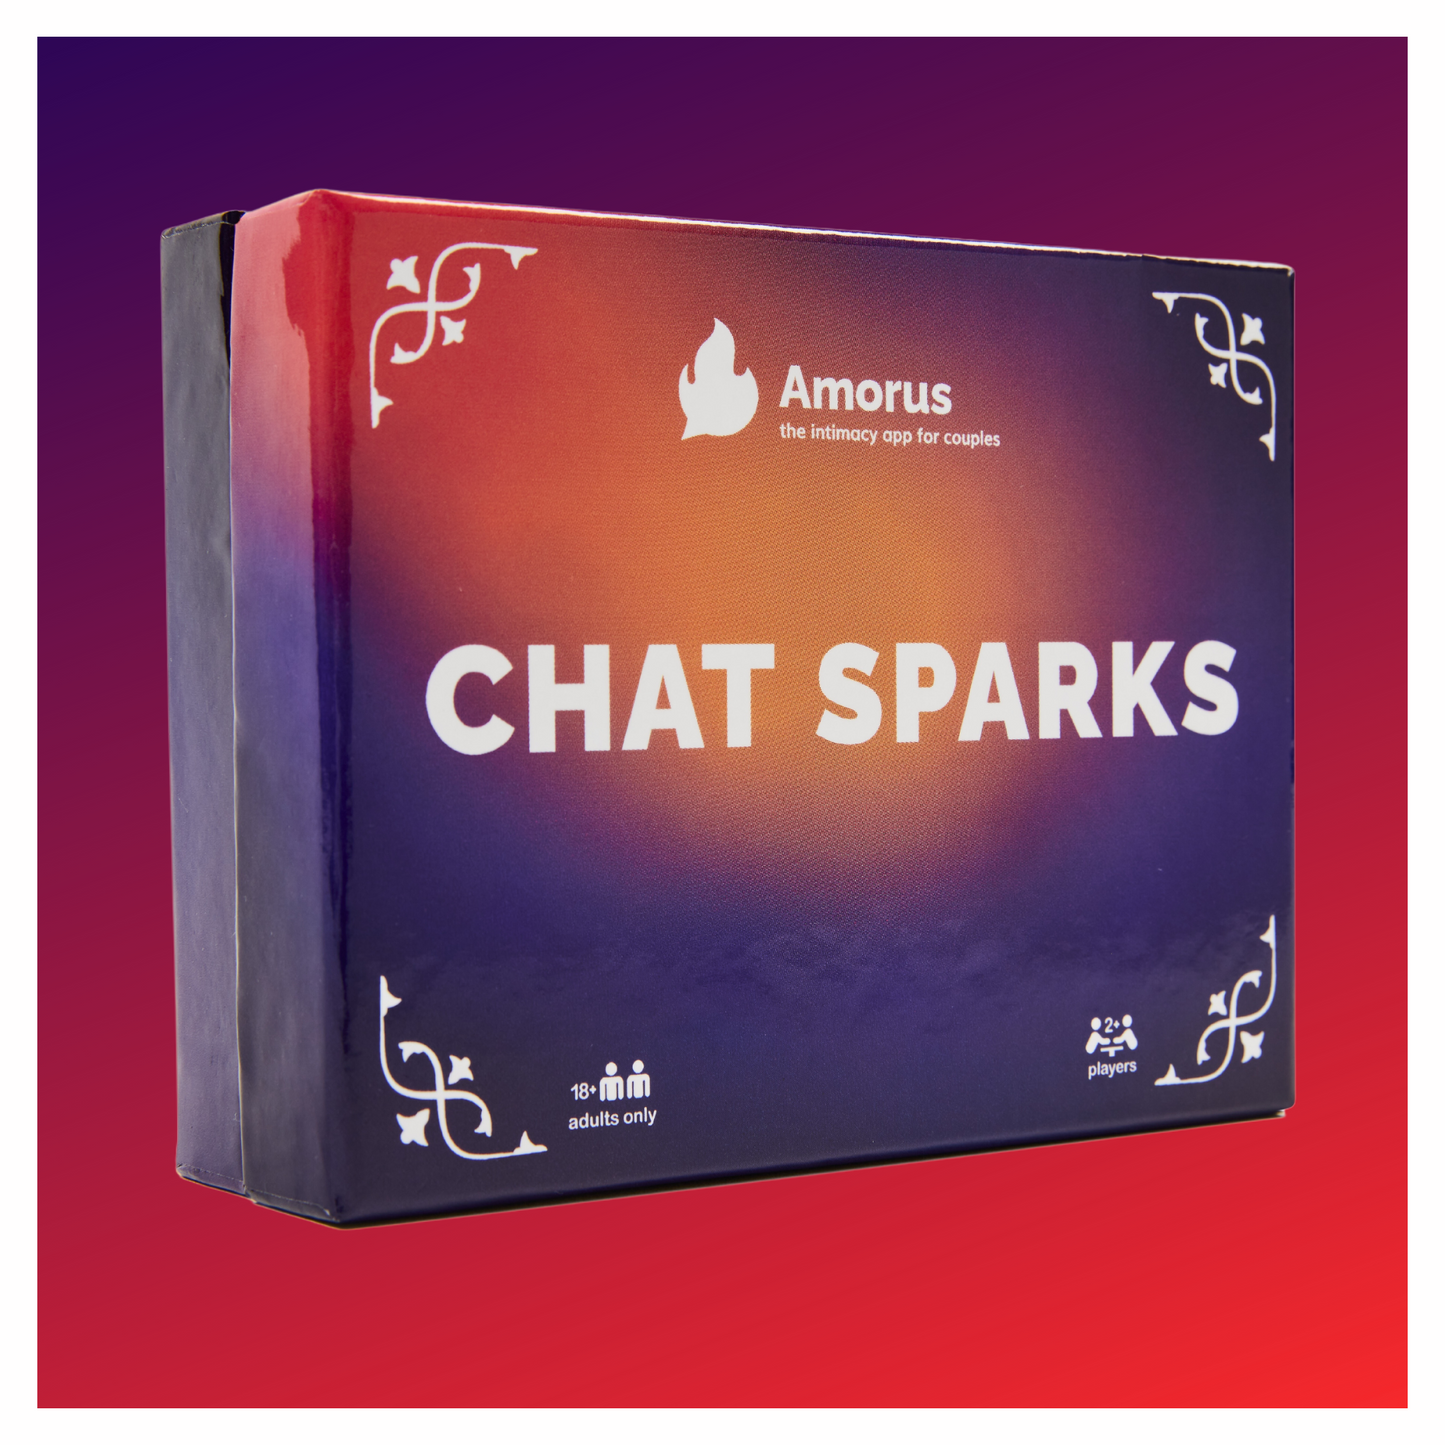 CHAT SPARKS